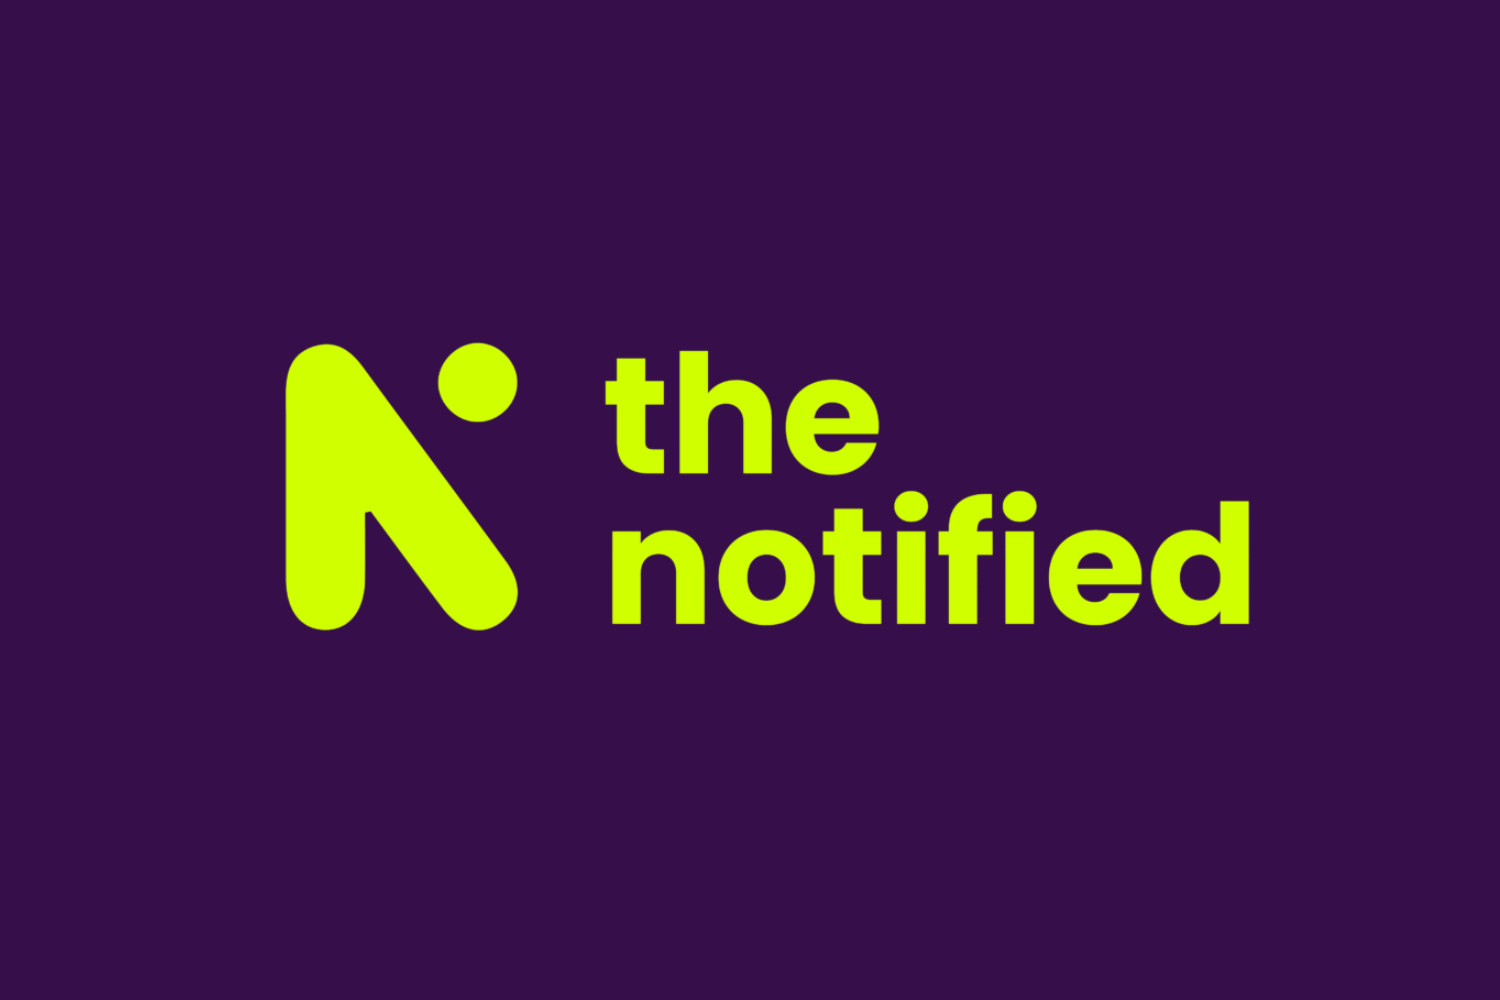 The notified – The Art of Brand Creation